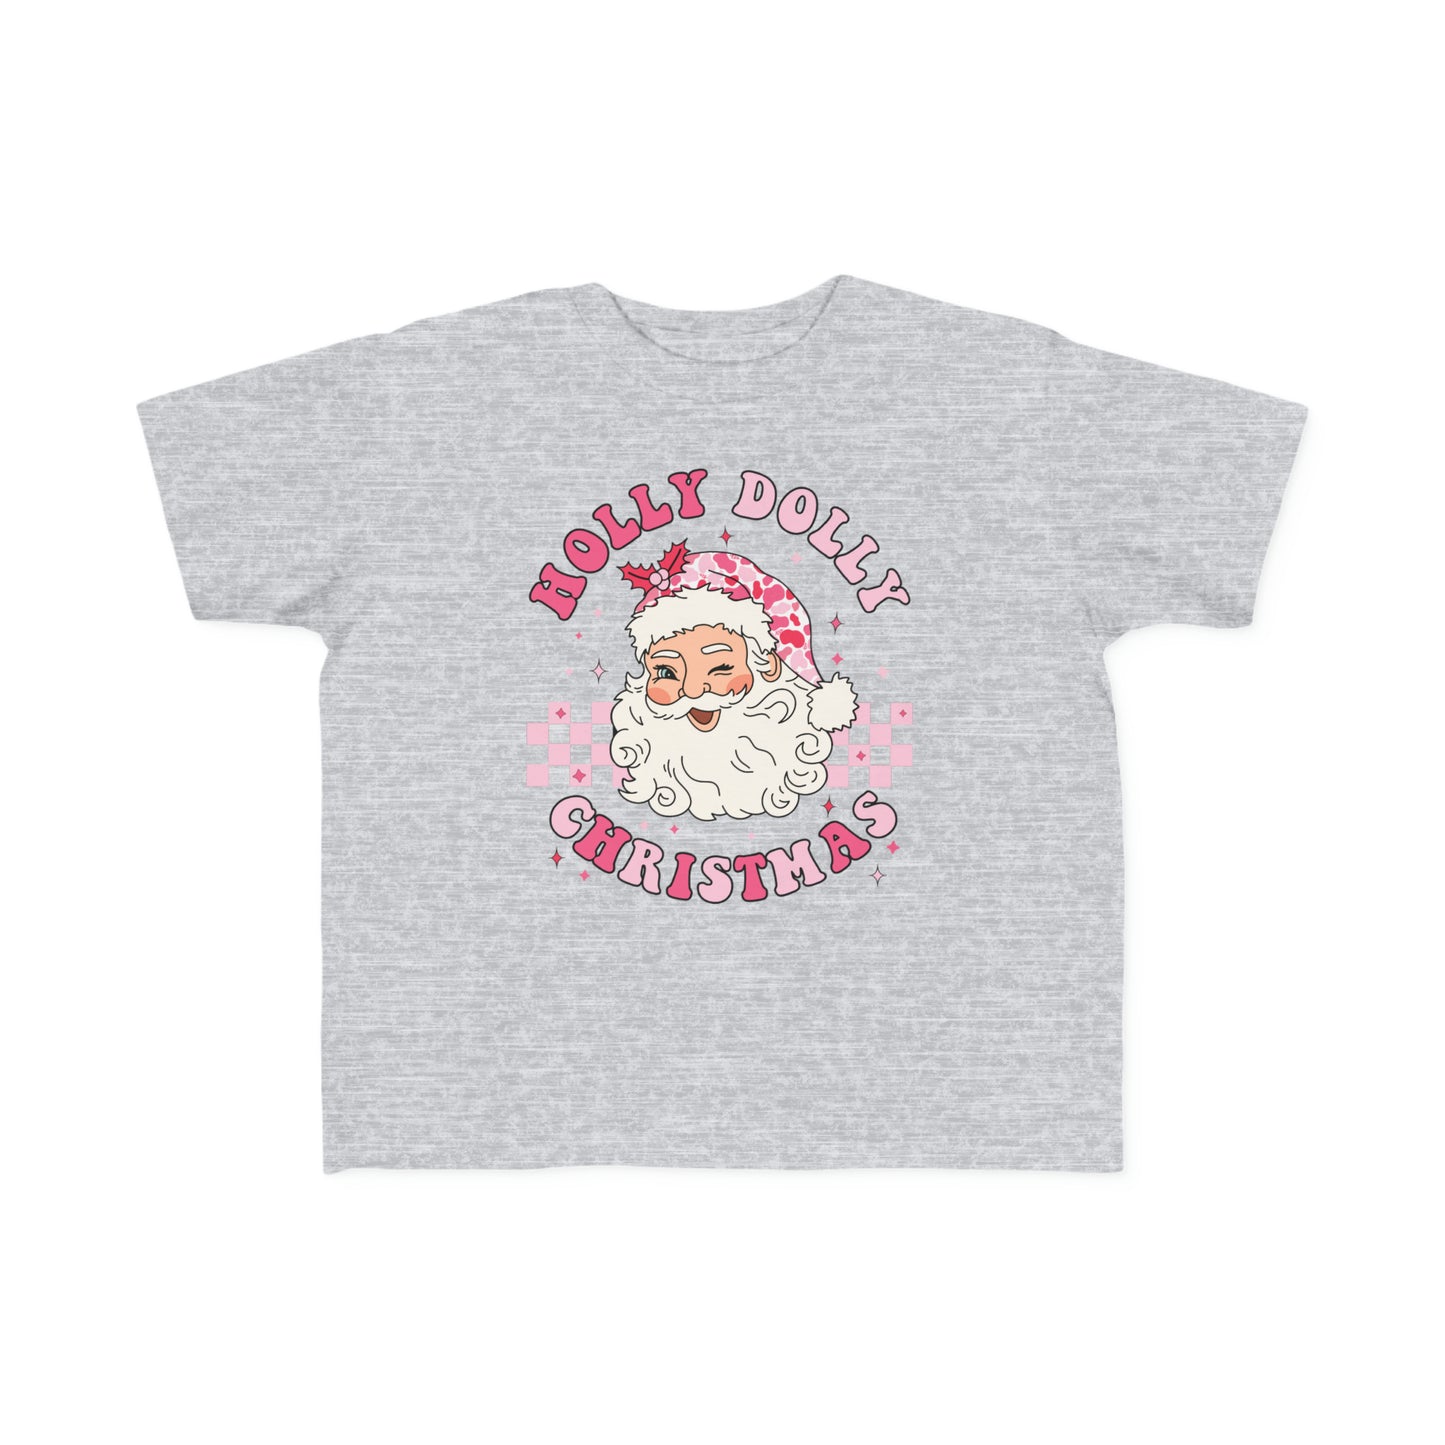 Holly Dolly Christmas Toddler's Fine Jersey Tee